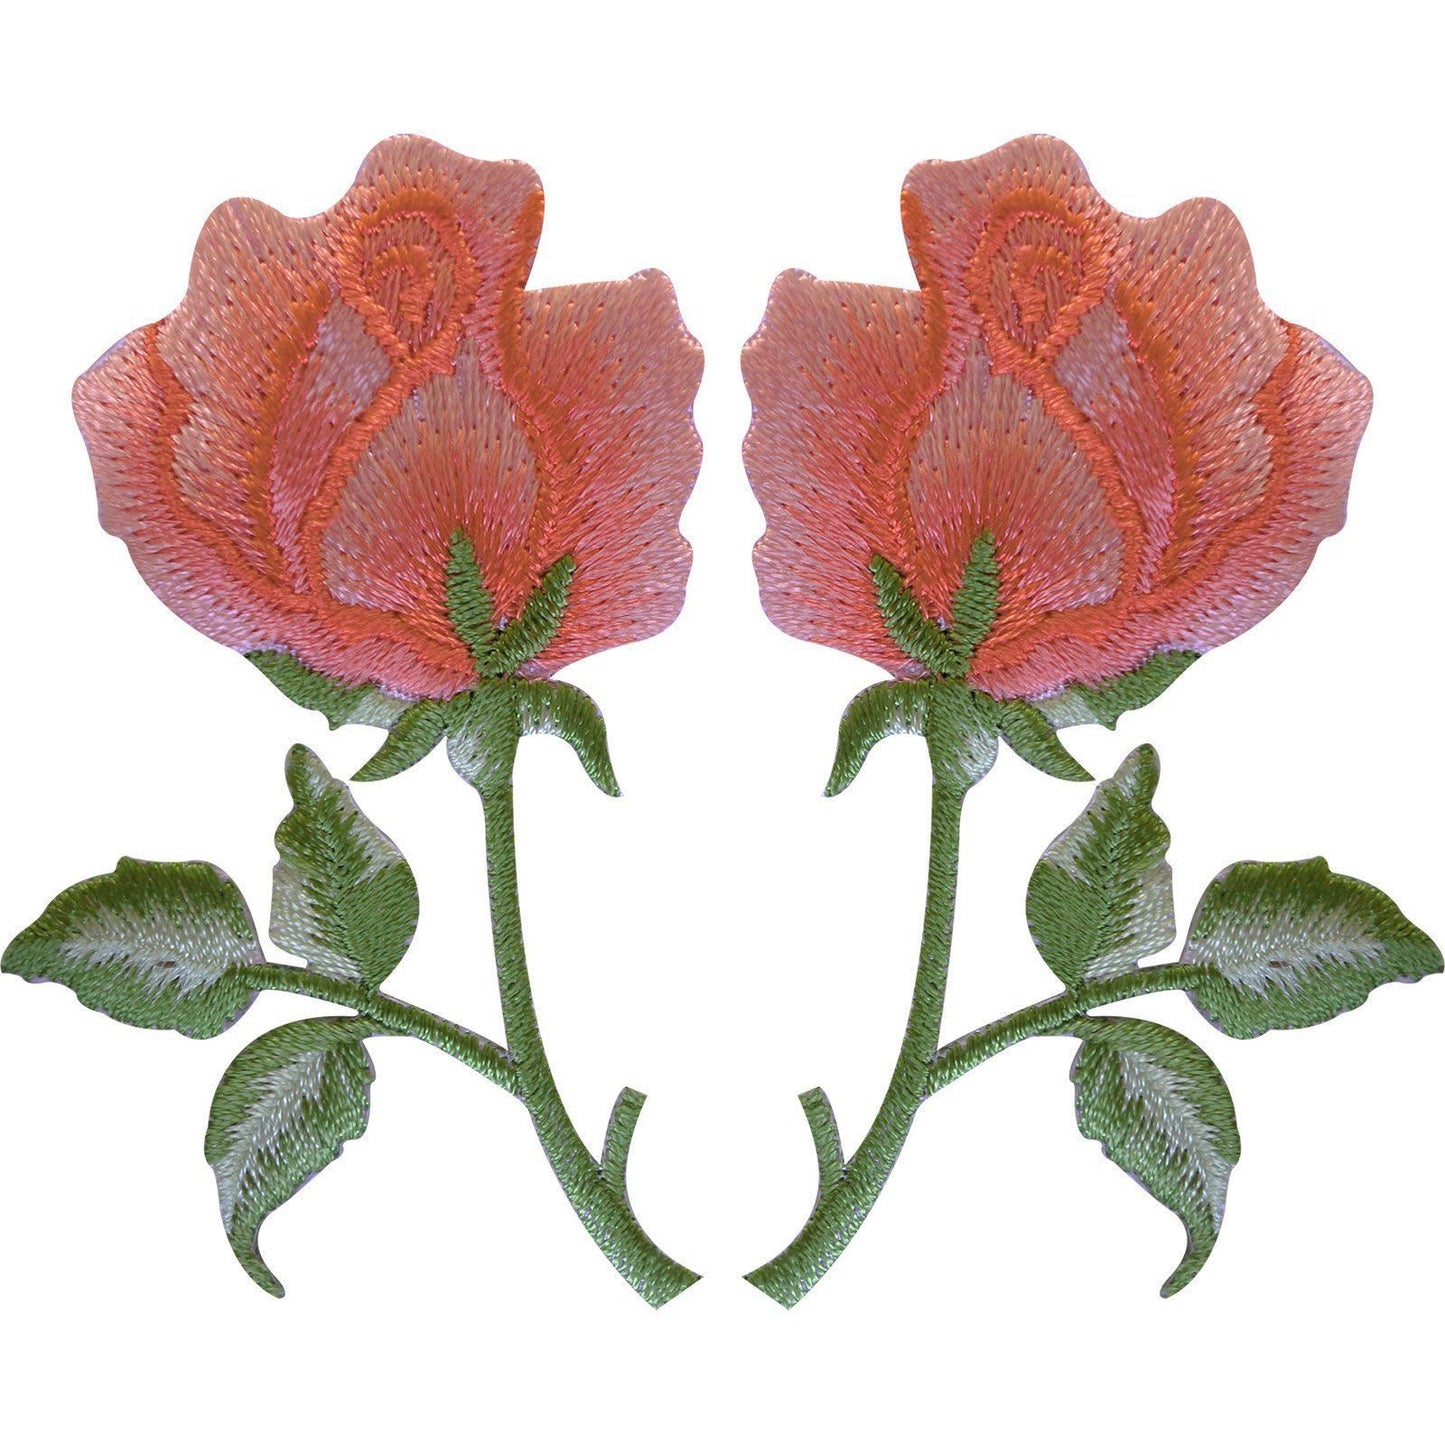 Pair of Peach Pink Rose Patches Iron Sew On Embroidered Roses Flower Patch Badge